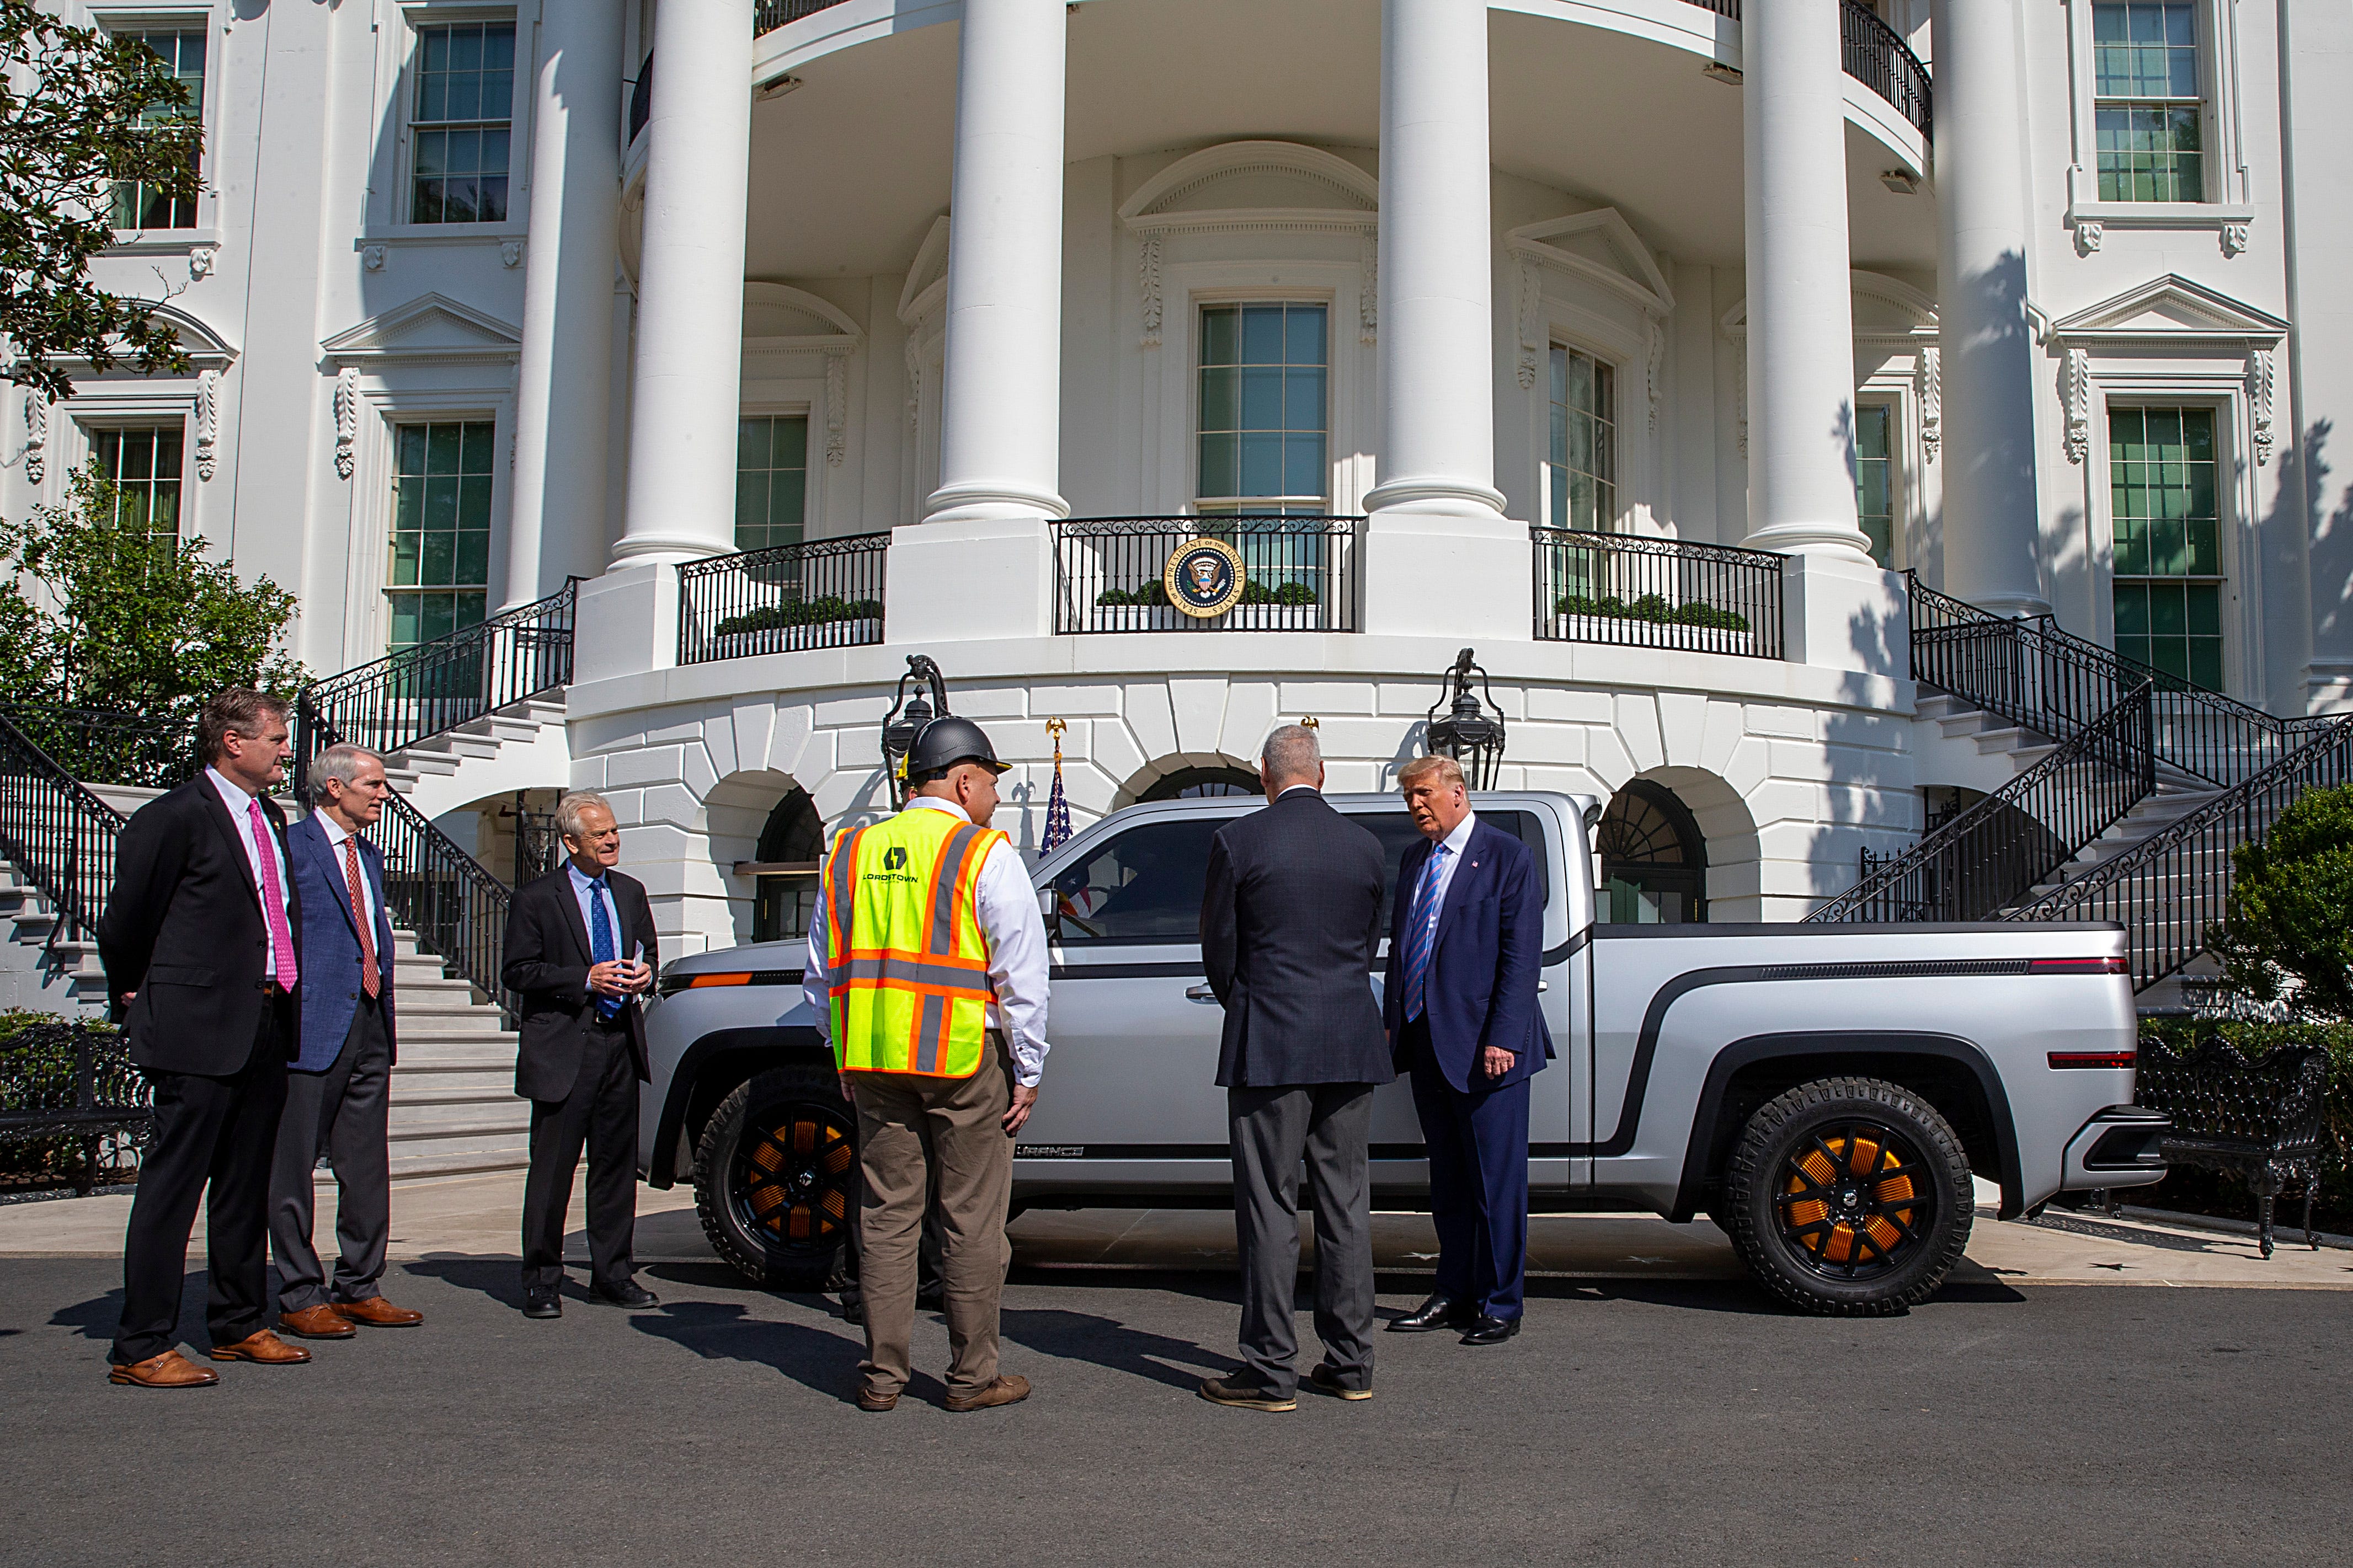 WASHINGTON, DC - SEPTEMBER 28: U.S. President Donald Trump chats with Steve Burns Lordstown Motors CEO about the new Endurance all-electric pickup truck on the south lawn of the White House on September 28, 2020 in Washington, DC. They bought the old GM Lordstown plant in Ohio to build the Endurance all-electric pickup truck, inside those four wheels are electric motors similar to electric scooters.  (Photo by Tasos Katopodis/Getty Images) ORG XMIT: 775569258 ORIG FILE ID: 1277168683